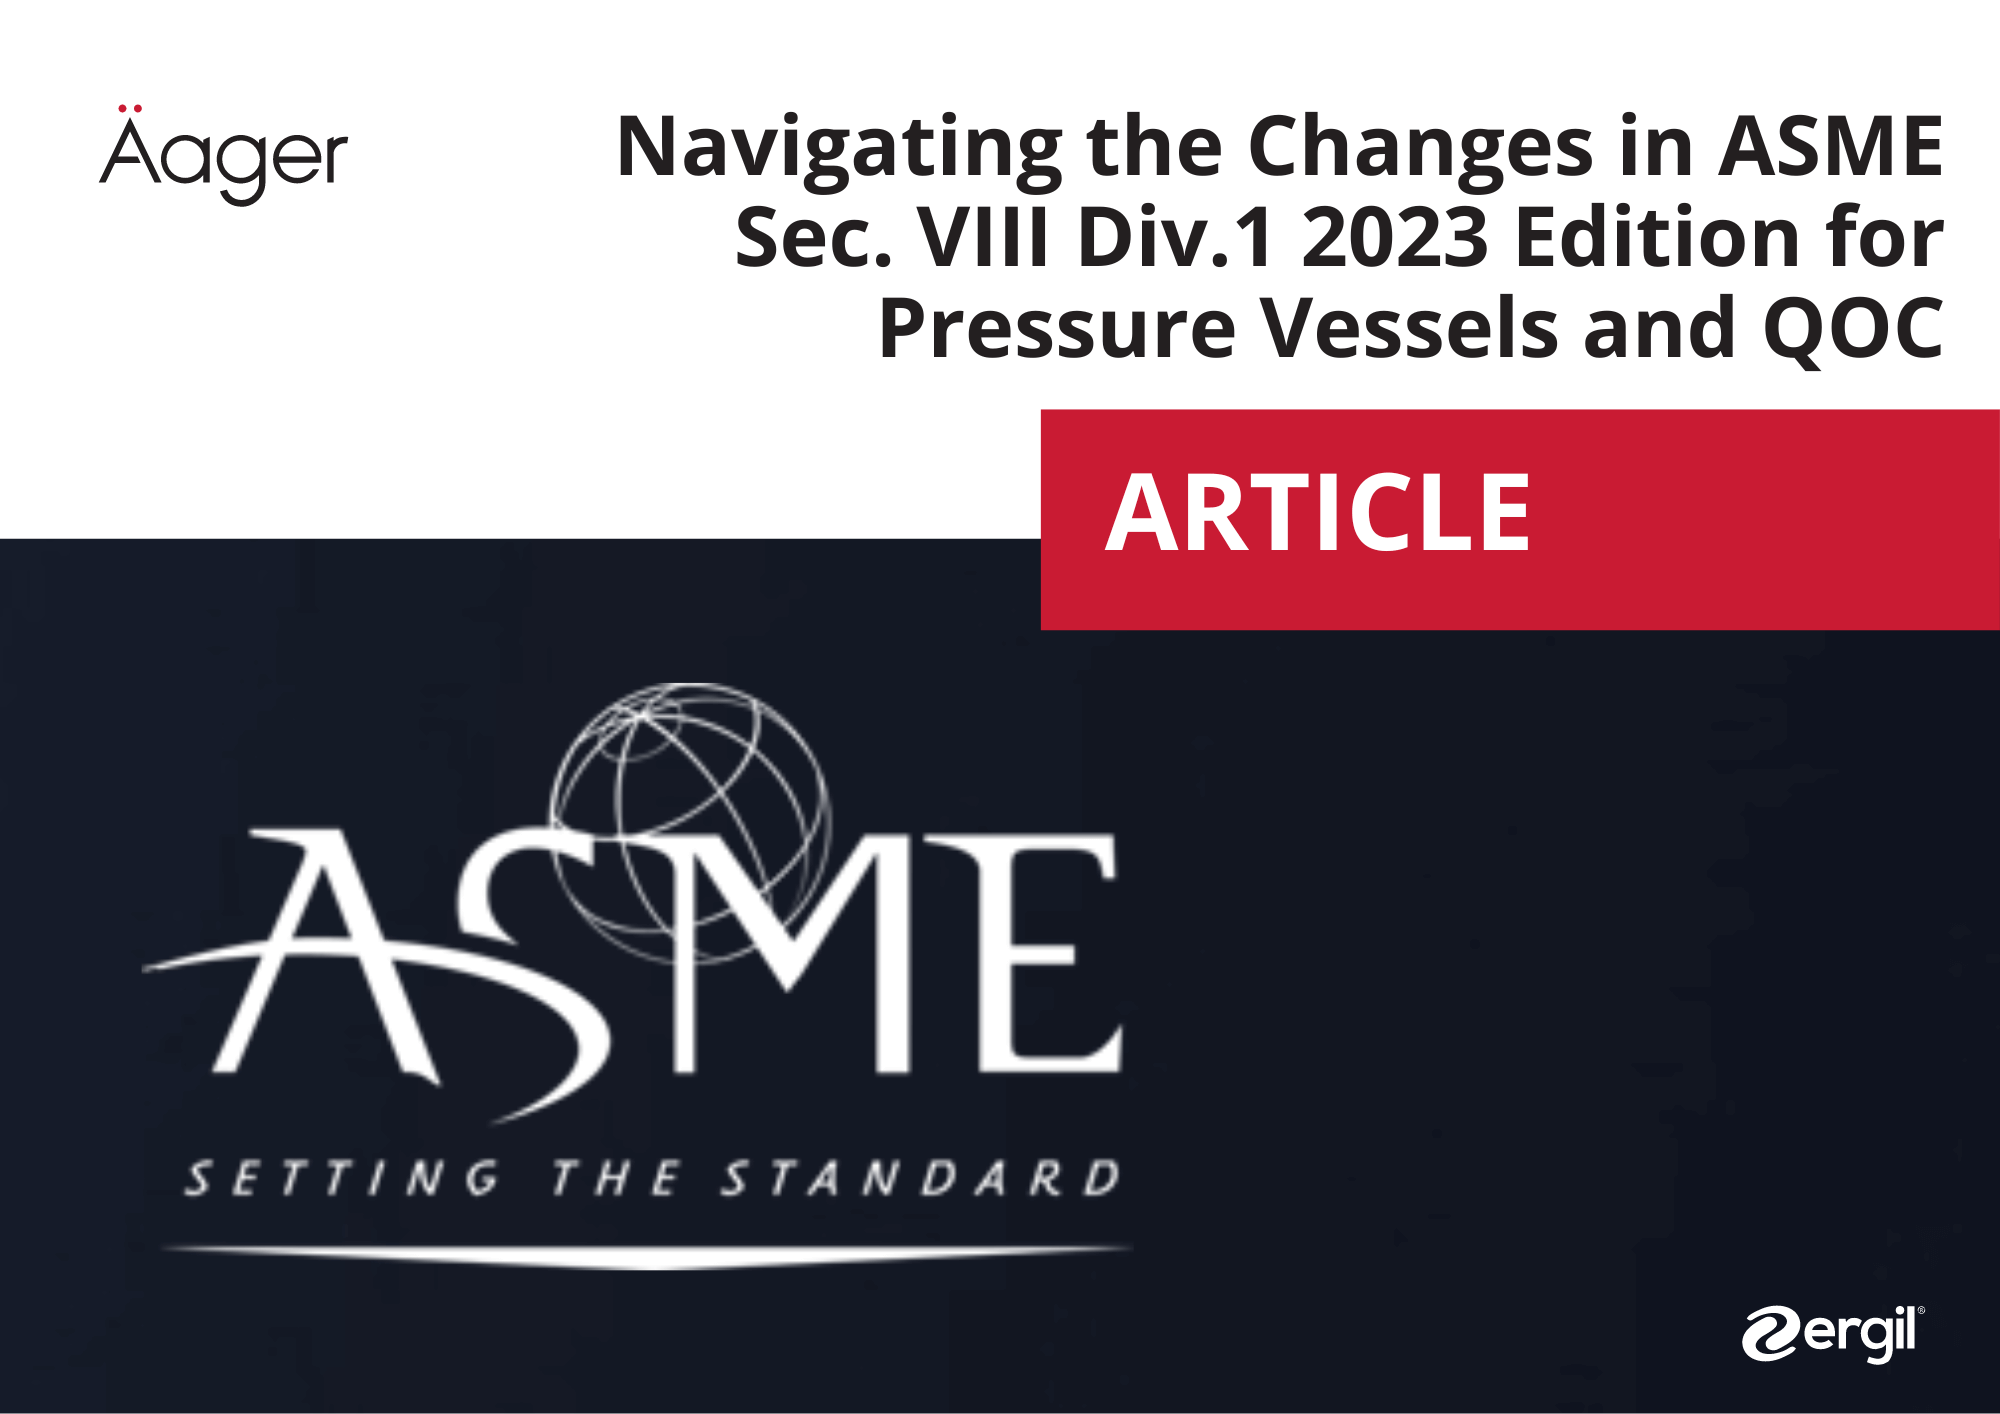 Navigating the Changes in ASME Sec. VIII Div.1 2023 Edition for Pressure Vessels and QOC 39